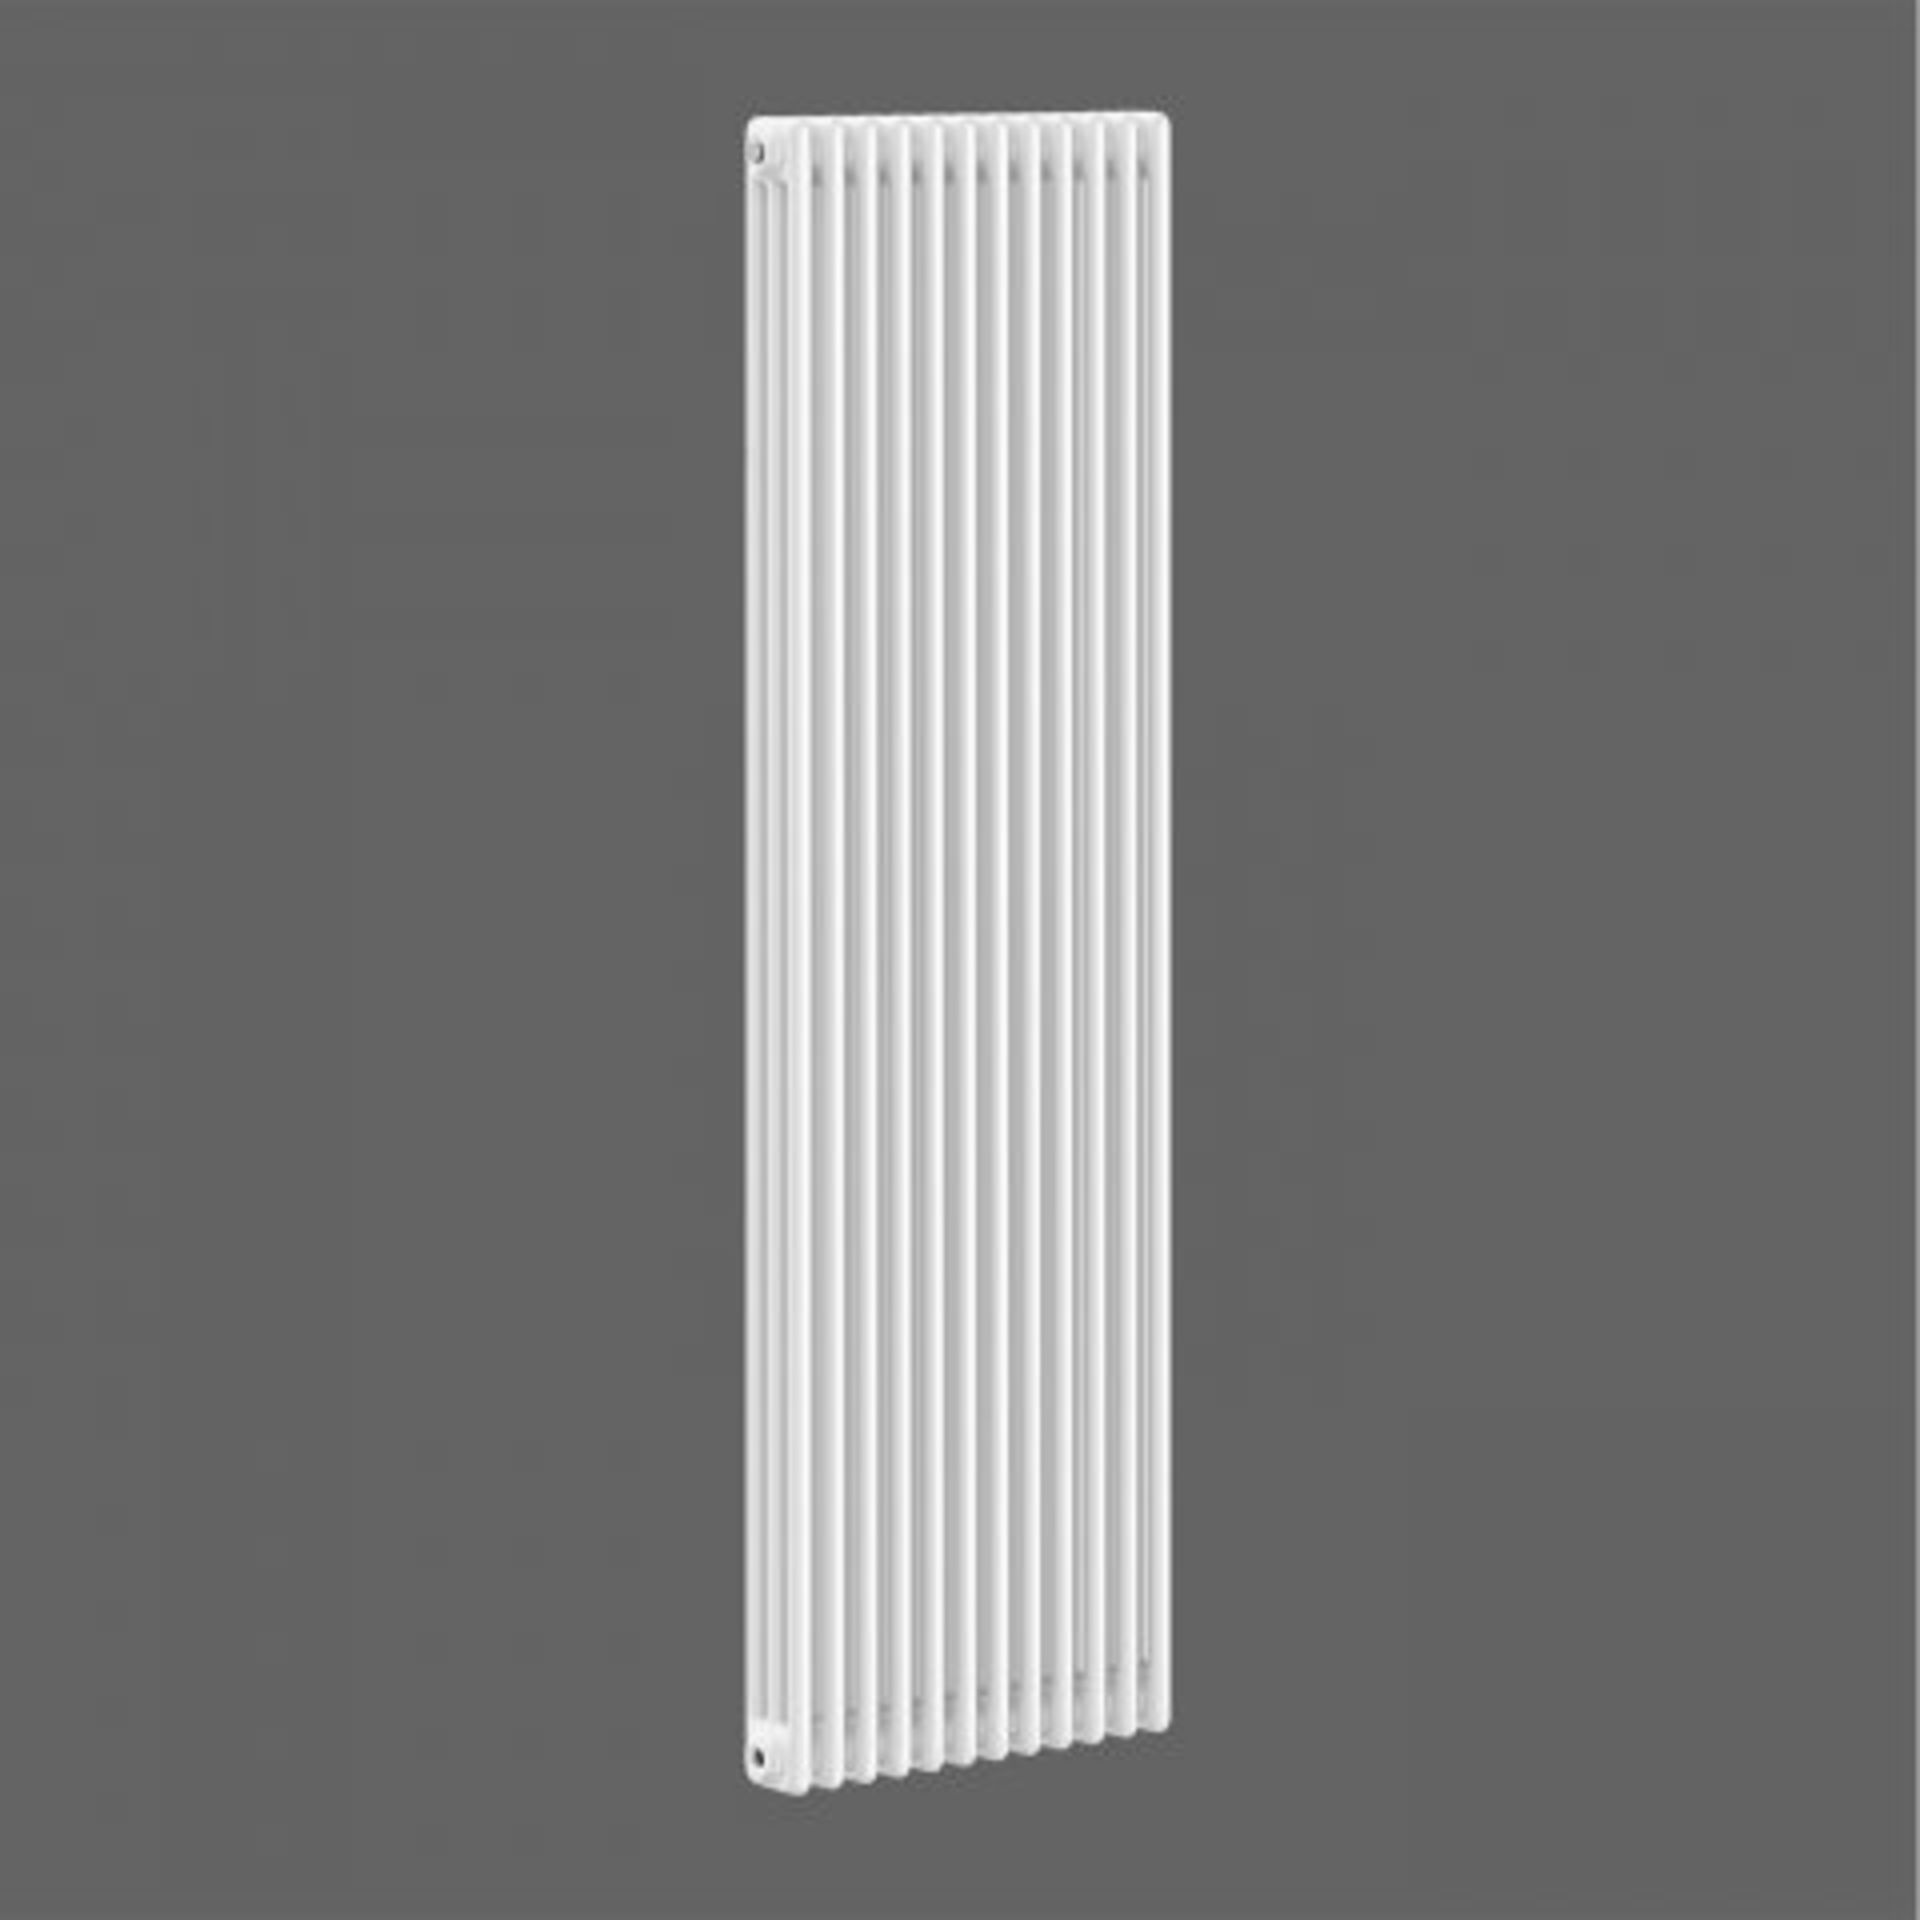 (N175) 1800x554mm White Triple Panel Vertical Colosseum Traditional Radiator. RRP £599.99. Classic - Image 3 of 3